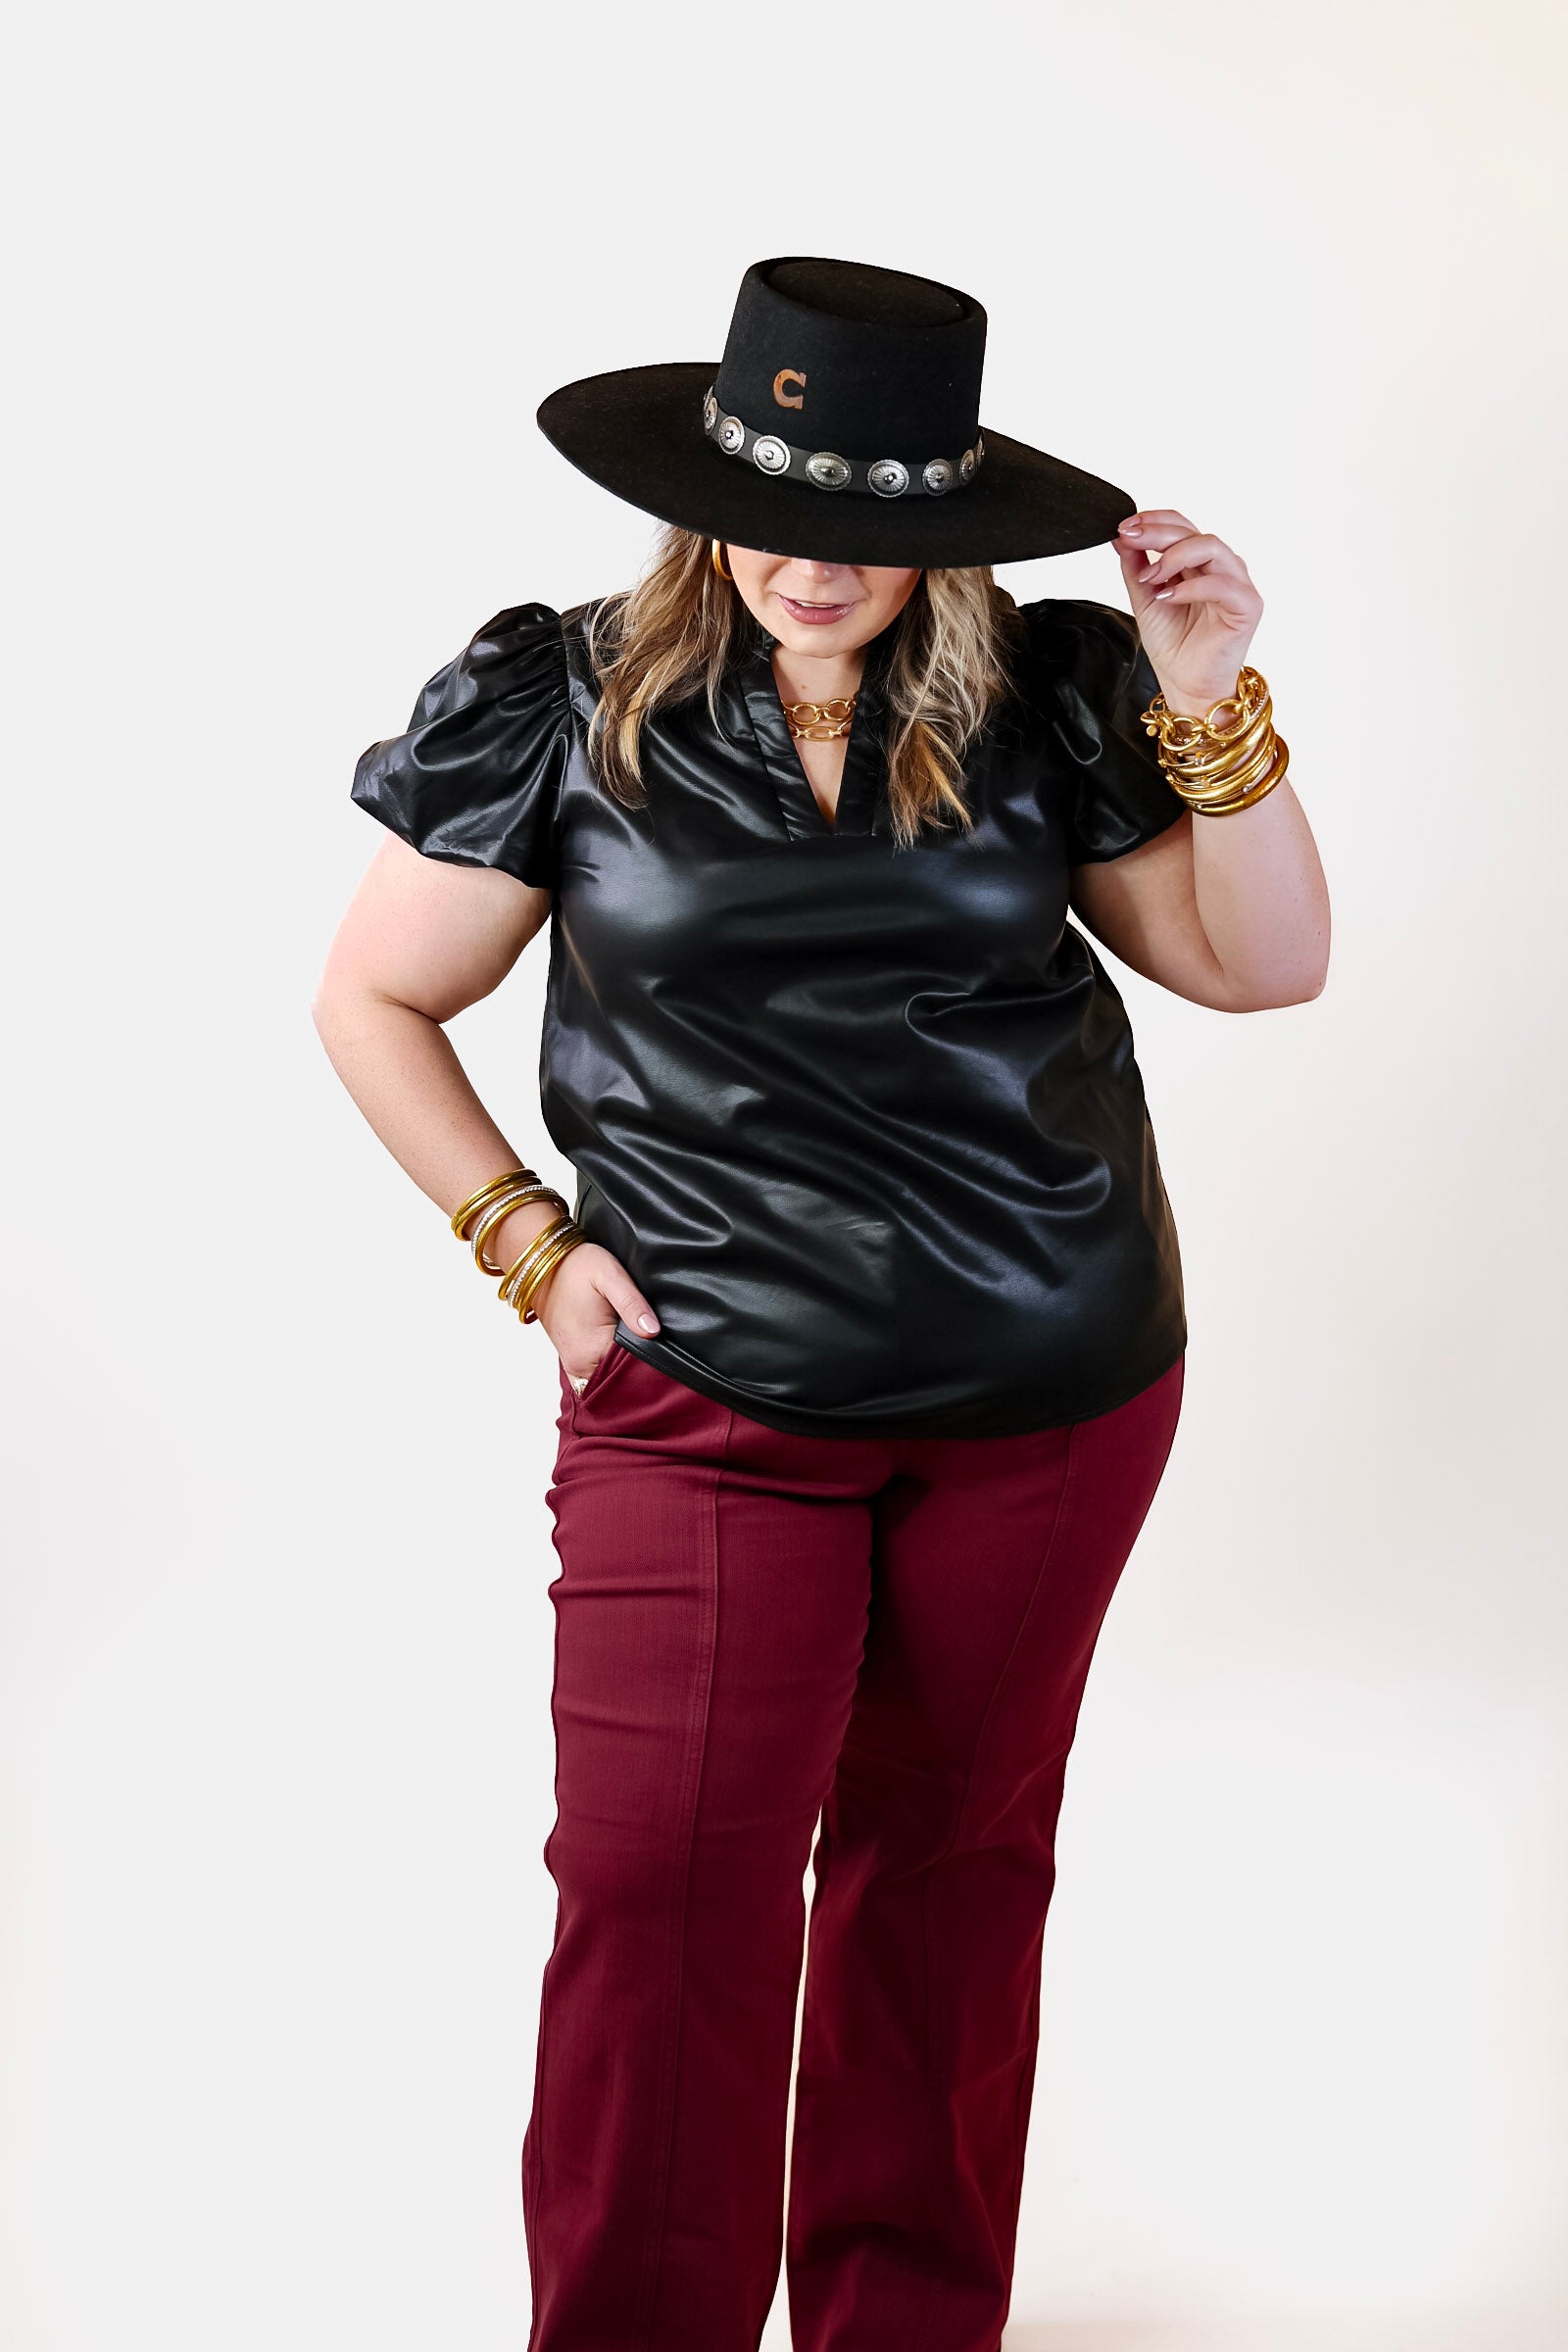 Replay The Night Faux Leather Top with Short Balloon Sleeves in Black - Giddy Up Glamour Boutique